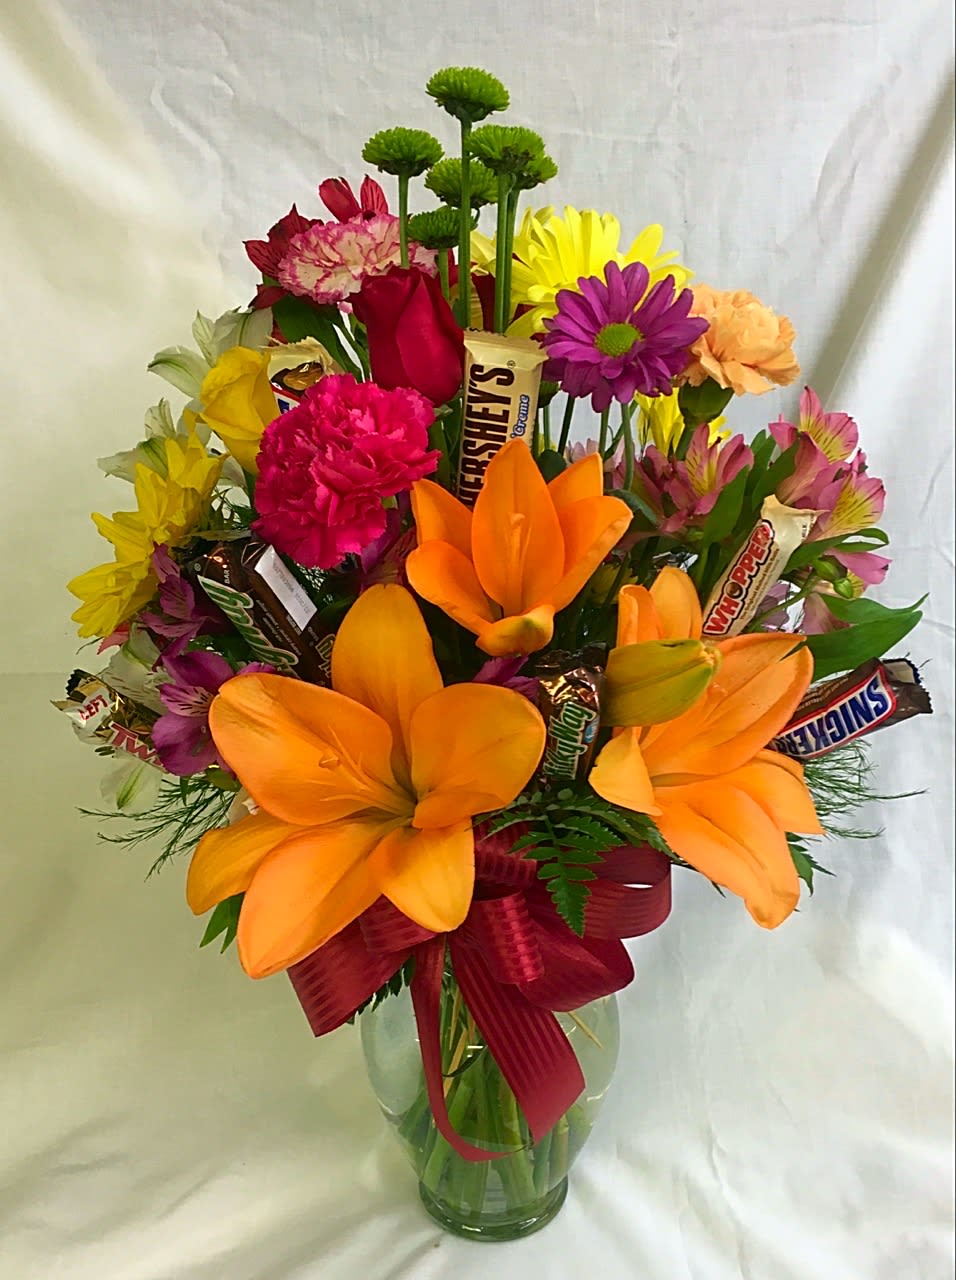 Fresh mixed arrangement in a vase with candy on sticks placed throughout